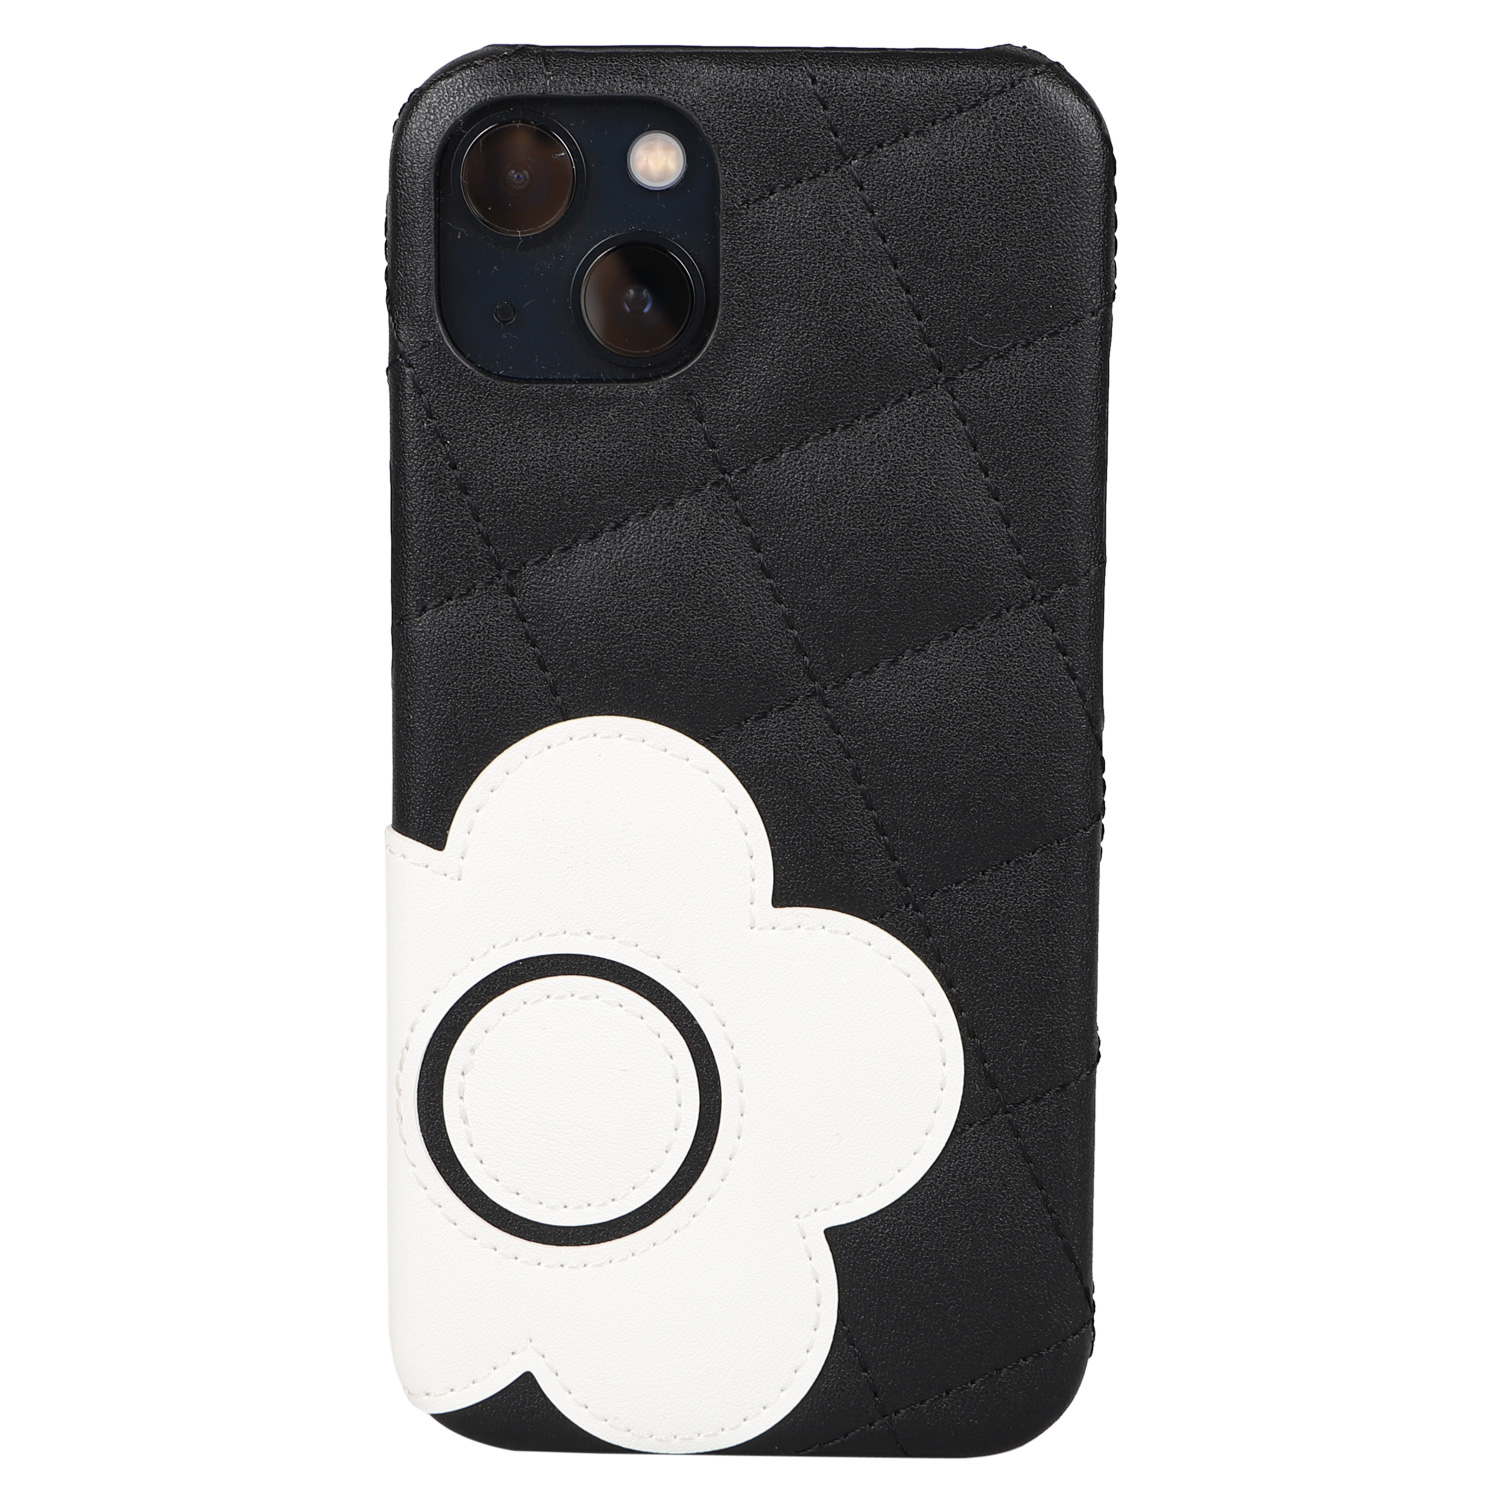 MARY QUANT マリークヮント iPhone 13 ケース スマホ 携帯 レディース マリクワ PU QUILT LEATHER BACK CASE IP13-MQ03｜sneak｜02